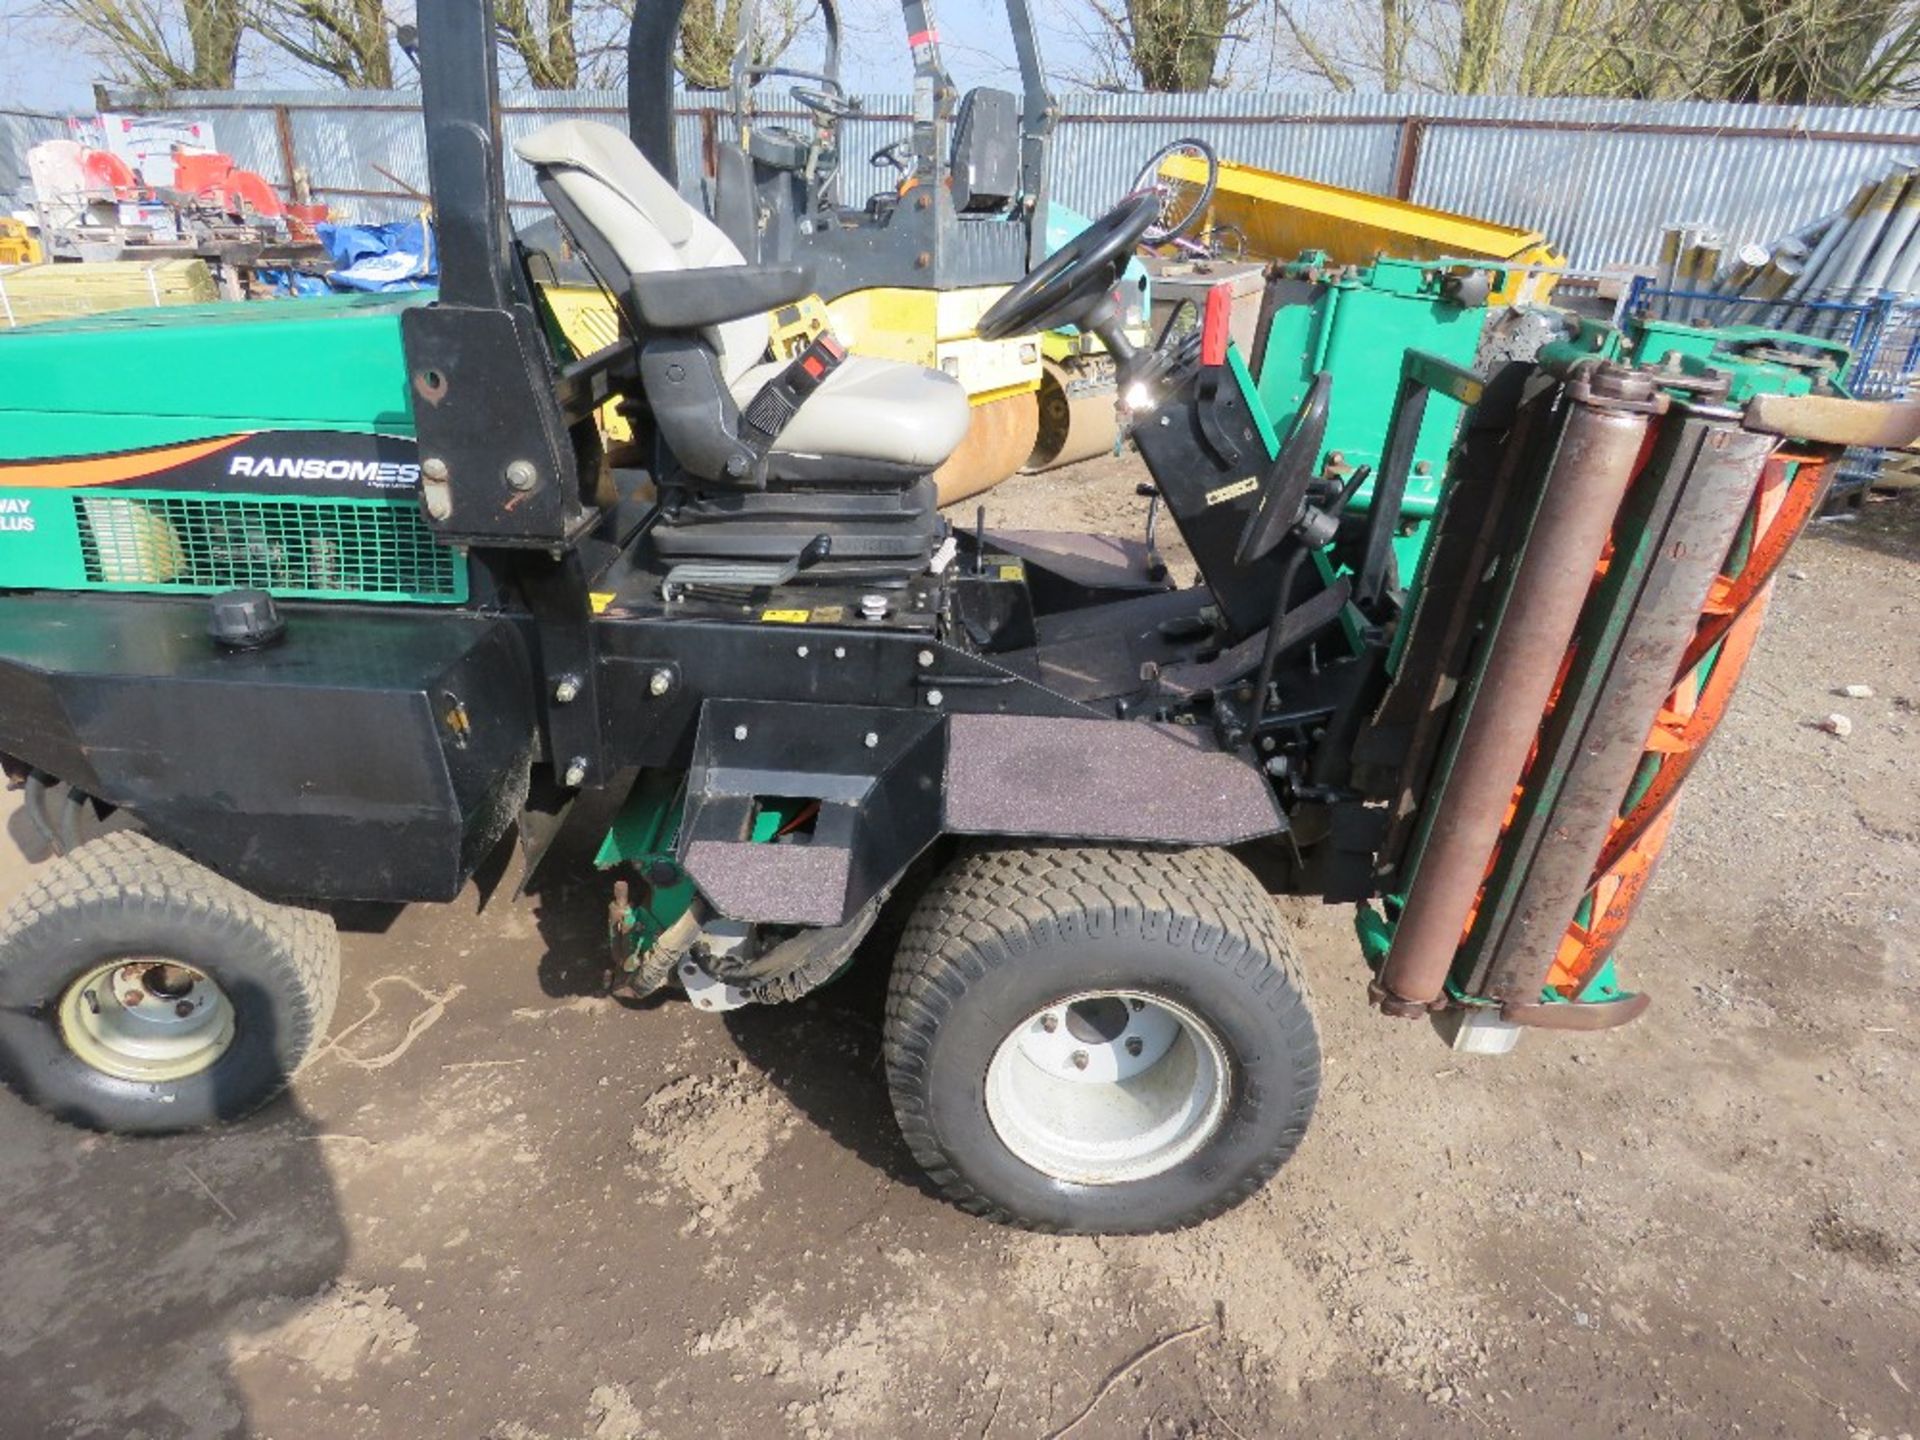 RANSOMES PARKWAY 2250 PLUS PROFESSIONAL TRIPLE RIDE ON MOWER, 4WD, 3300 REC HOURS. DIRECT FROM GOLF - Bild 2 aus 11